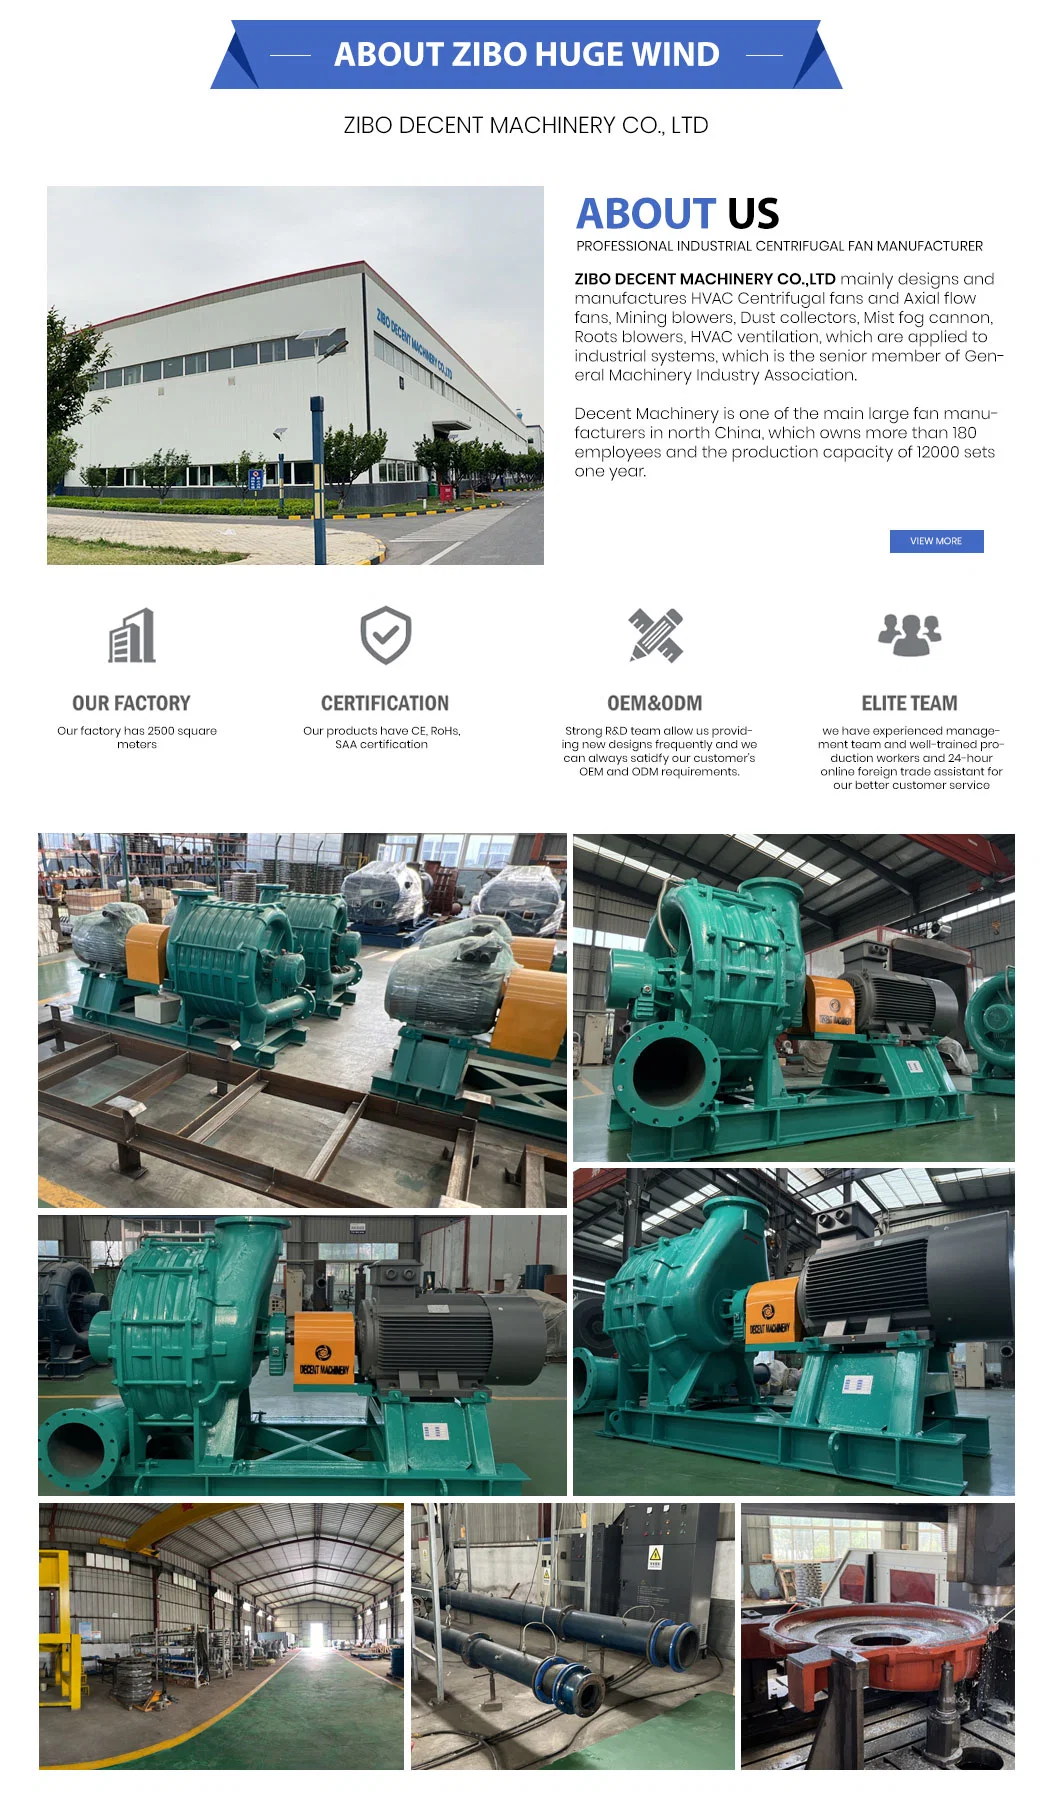 Decent Machinery Roots Type Blower Applied in Sewage Aeration Process-Sewage Treatment Compressor Industrial Air Blowers Roots Vacuum Pump